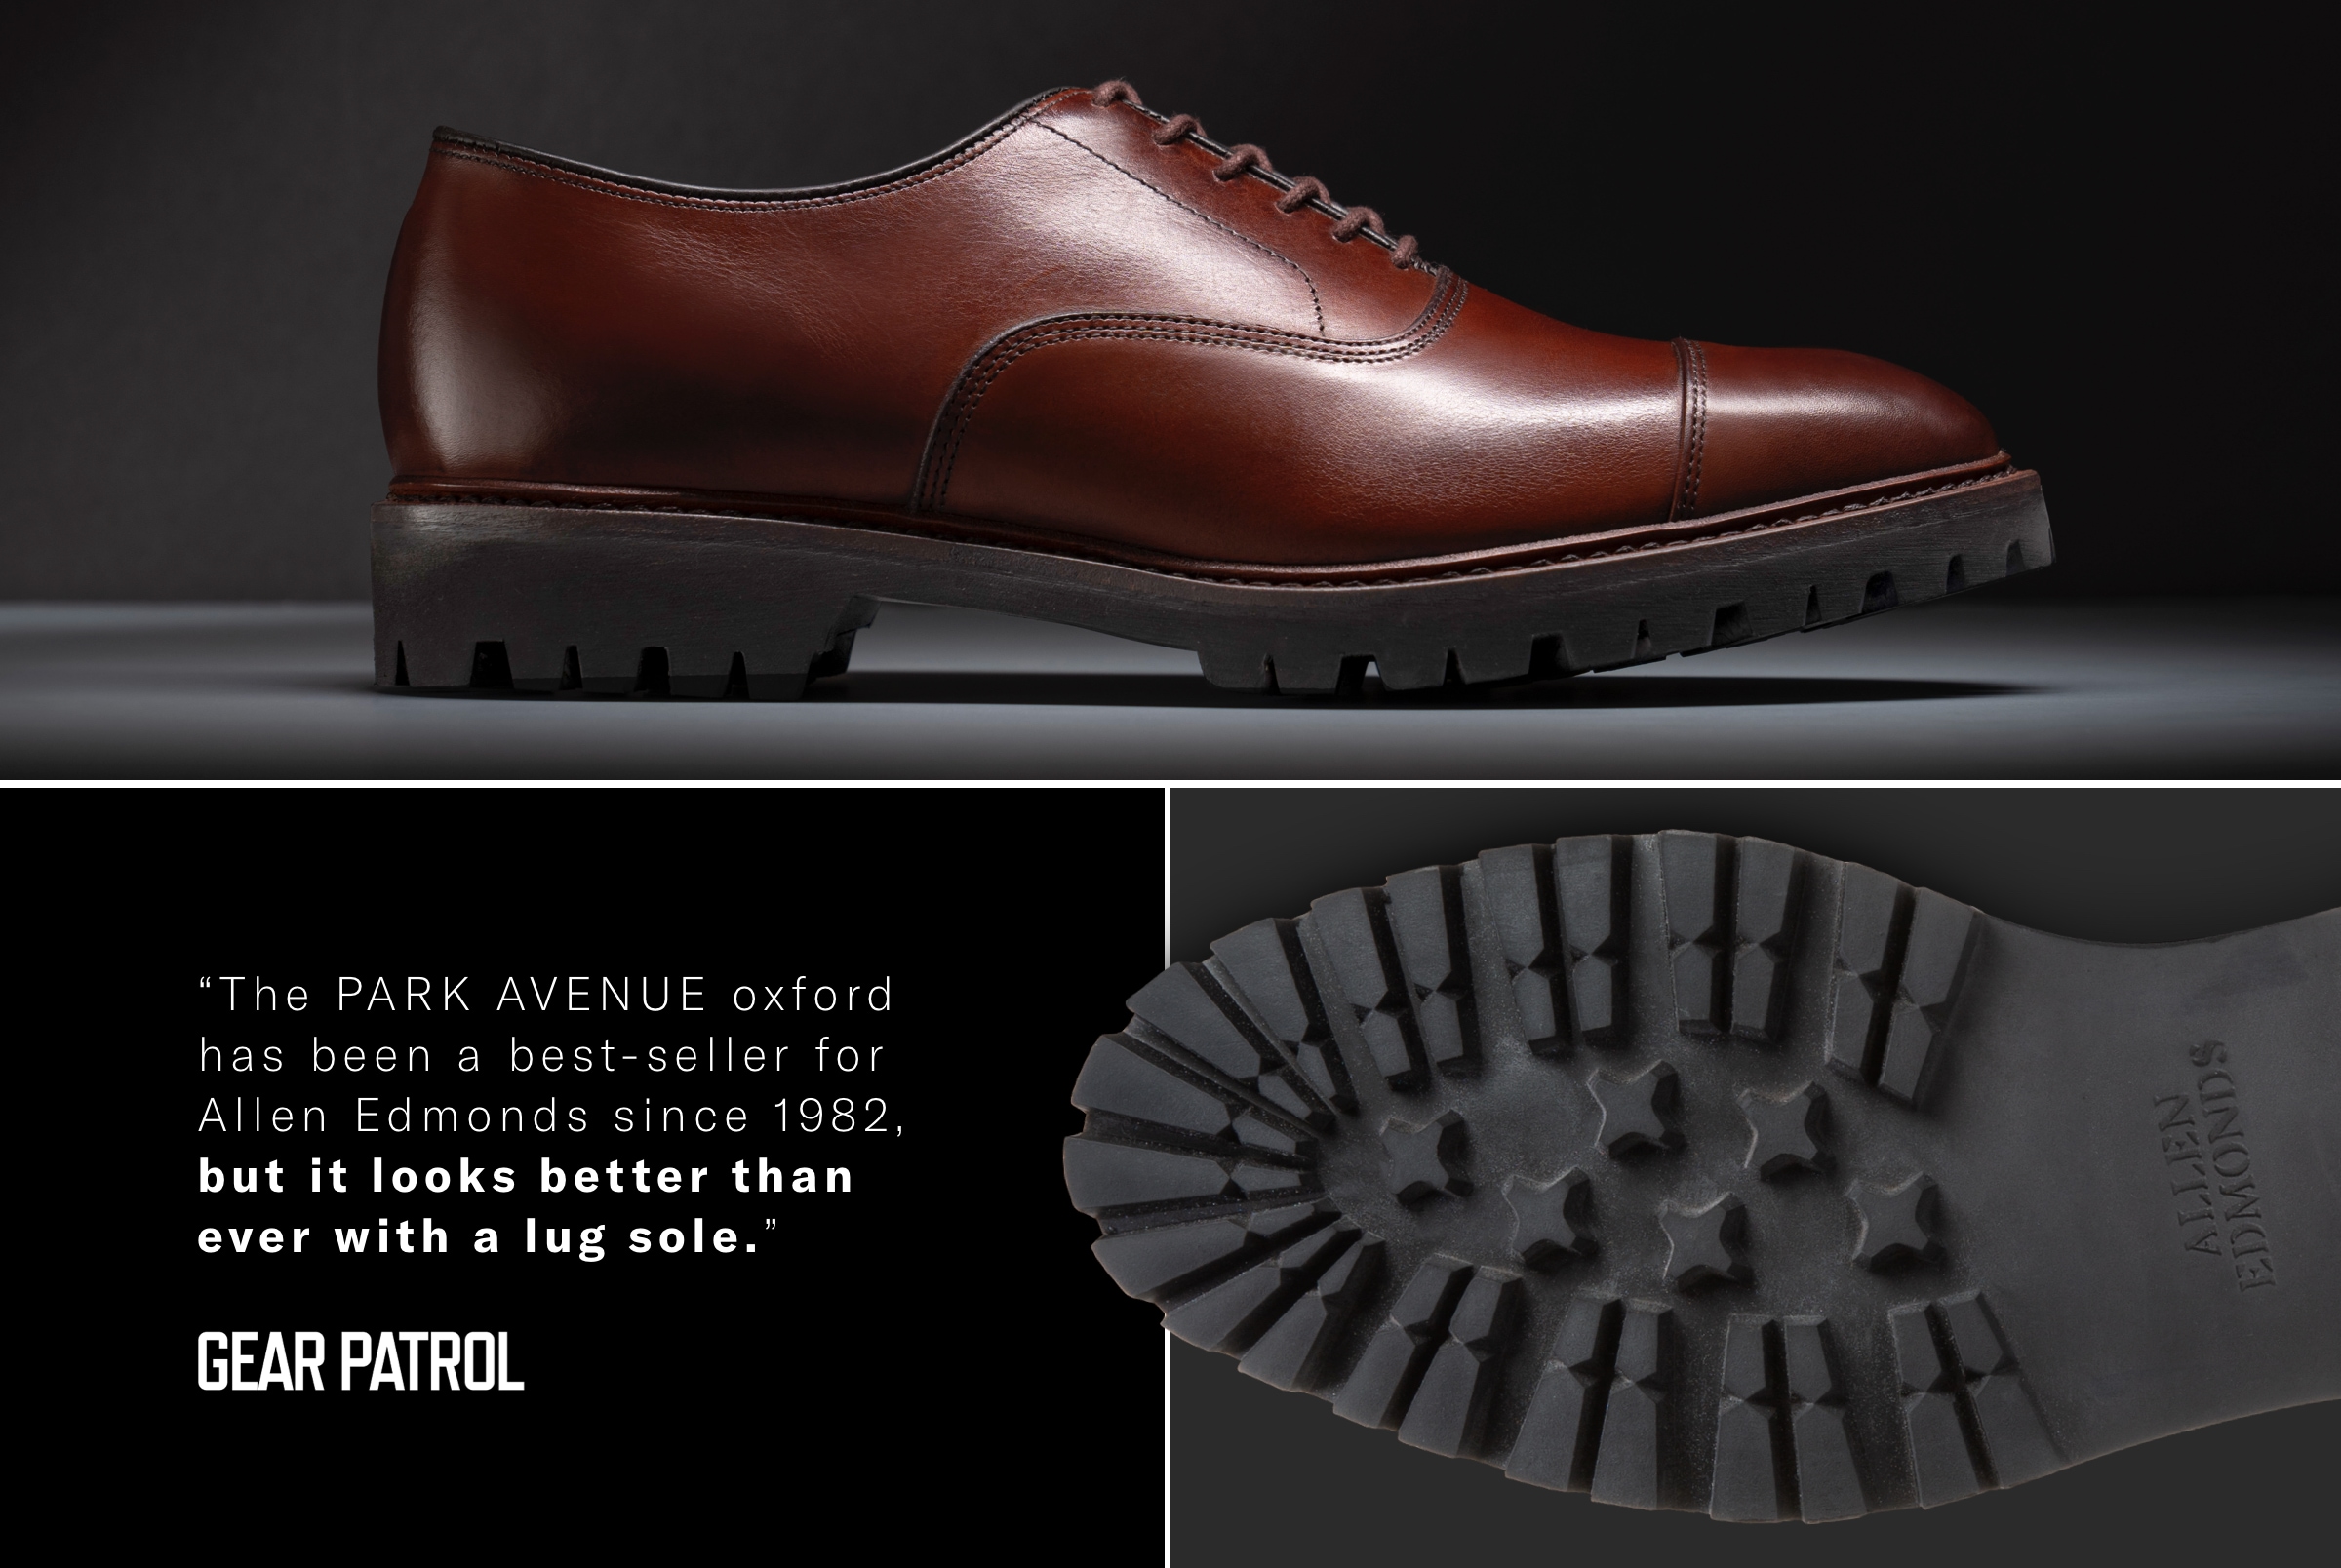 The Park Avenue oxford has been a best-seller for Allen Edmonds since 1982, but it looks better than ever with a lug sole. - GEAR PATROL